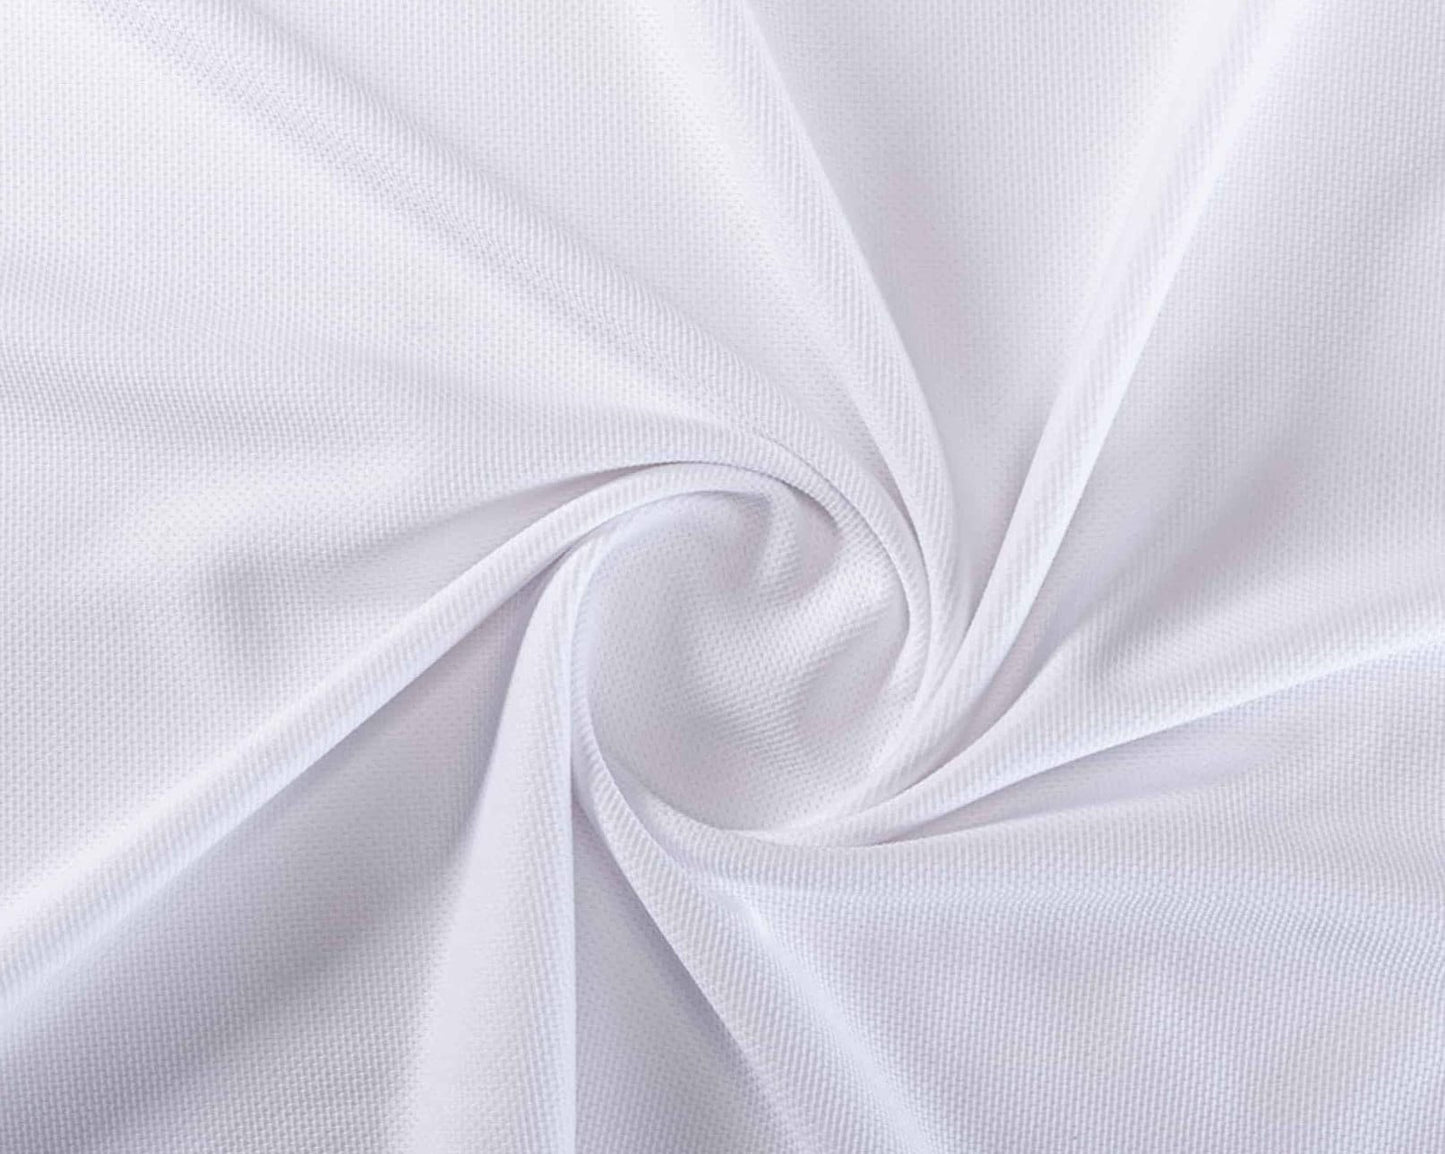 60" wide ProCool® Stretch-FIT Sports Jersey Silver CoolMax Fabric, wicking fabric, sold by the half yard